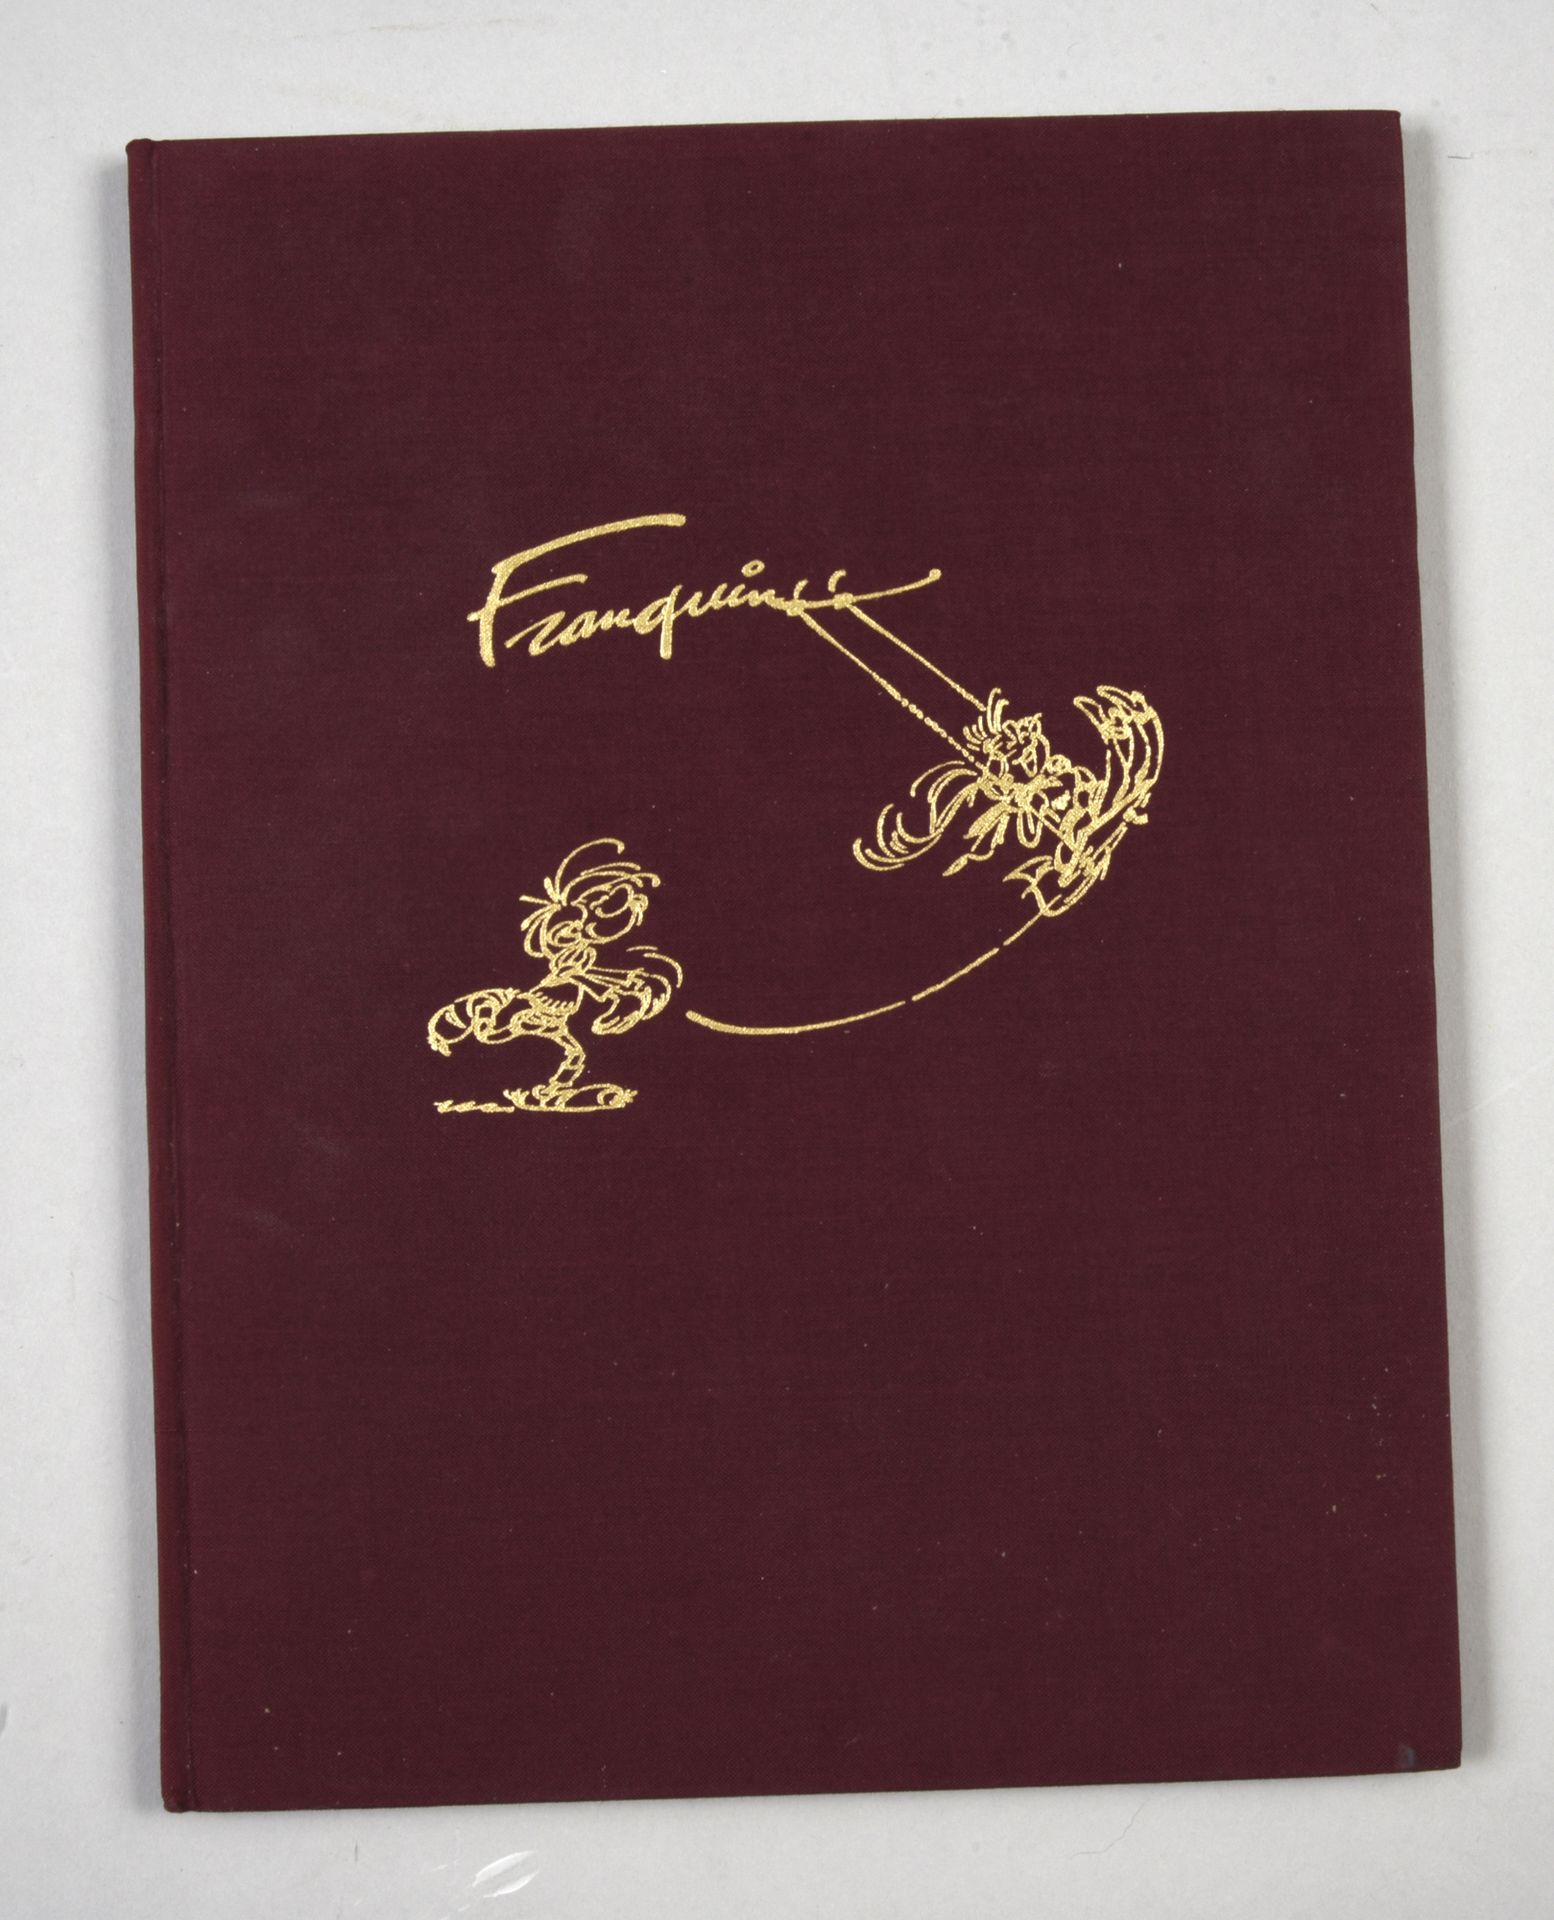 FRANQUIN Le livre d'or Franquin.
First edition (1982)
Close to new - Ed. Goupil &hellip;